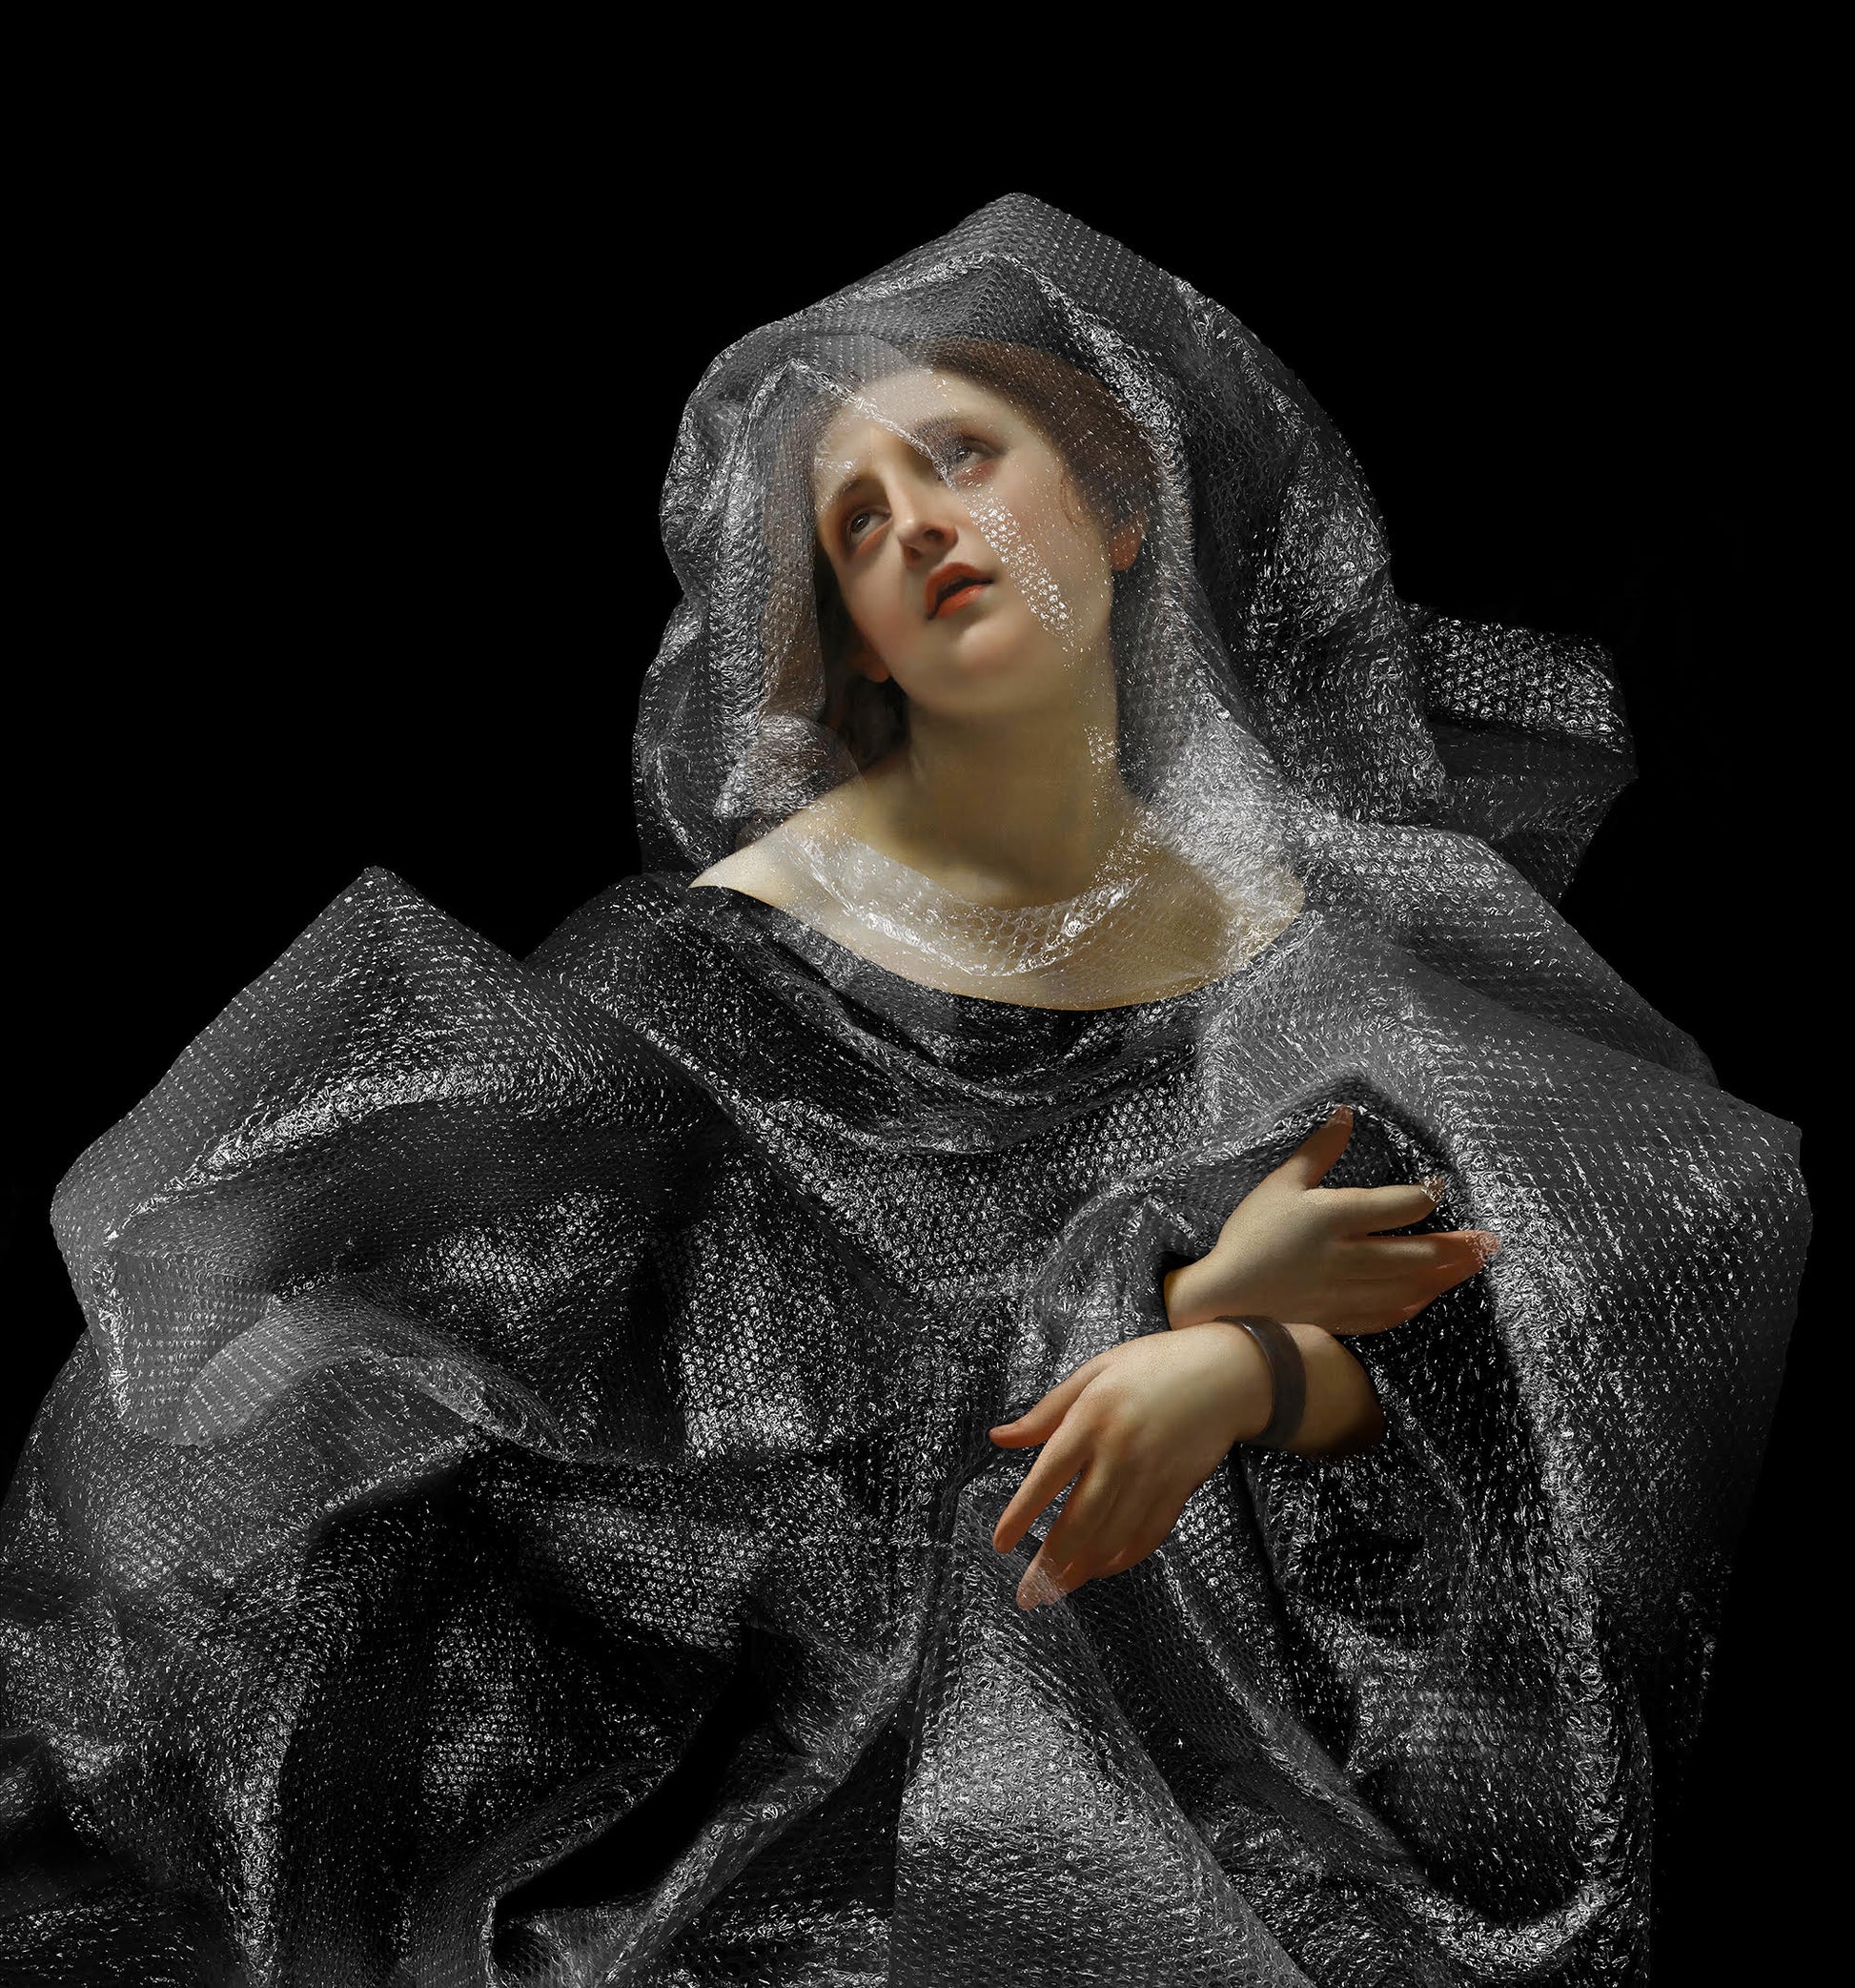 Art print by Magnus Gjoen titled 'Thou Shalt Go Gently into the Dark.' A playful and thought-provoking blend of Renaissance aesthetics and contemporary material, featuring a woman in a bubble wrap dress. Limited edition of 25, sized at 70 x 75 cm, priced at £995.00, inviting viewers to reflect on the paradox of vulnerability and resilience in art.